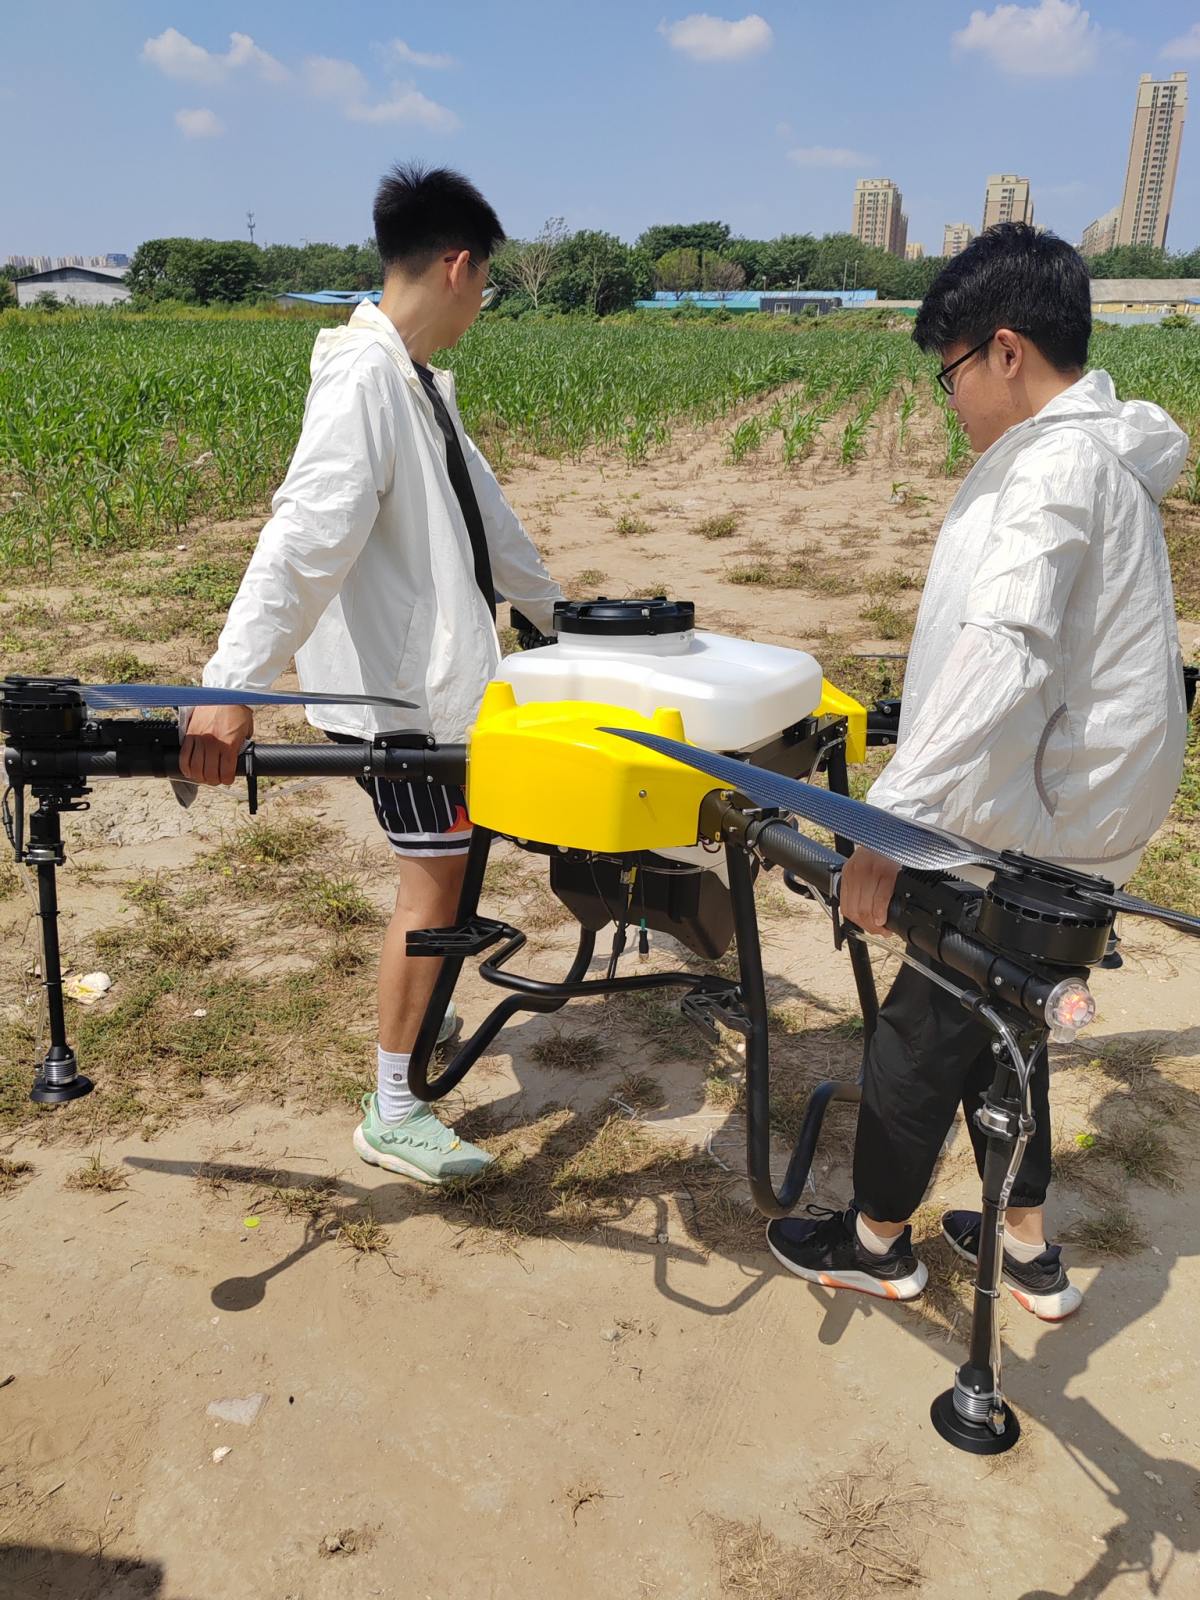 JT40L-404 agricultural sprayer drones with centrifugal nozzles T40 drone 70L spreader tank-drone agriculture sprayer, agriculture drone sprayer, sprayer drone, UAV crop duster